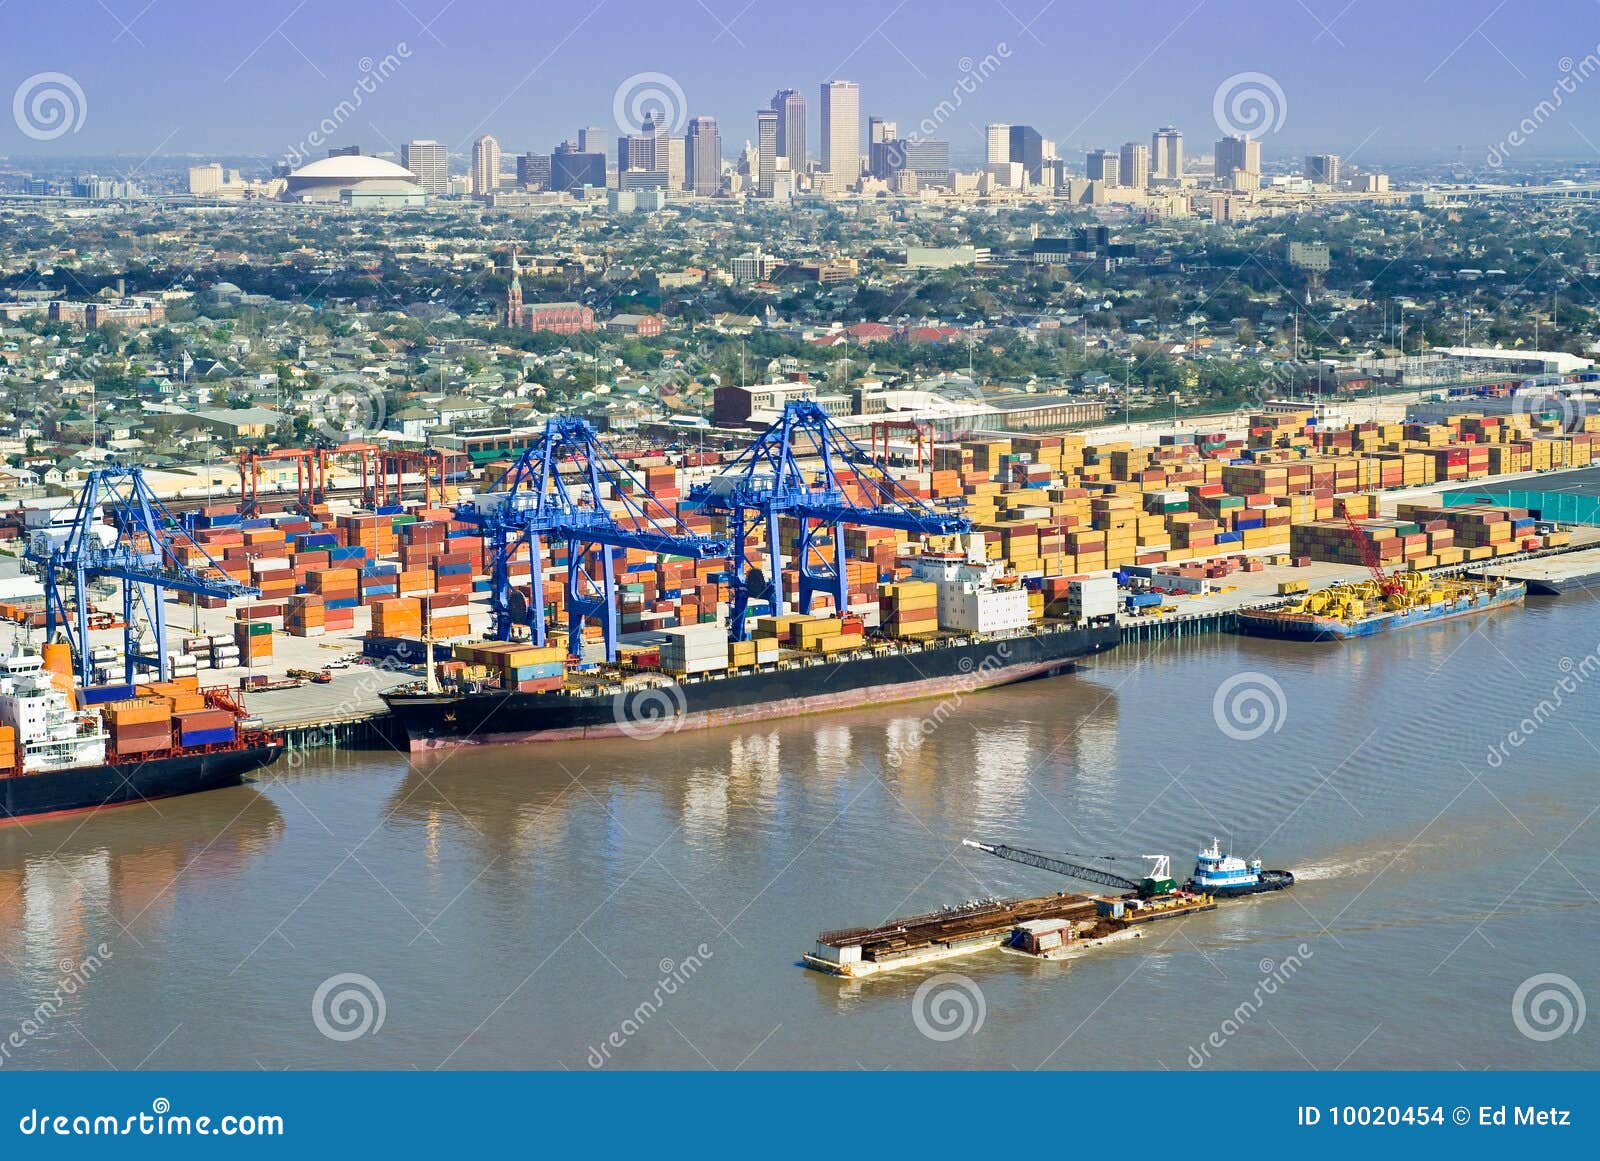 new orleans cityscape with port activity